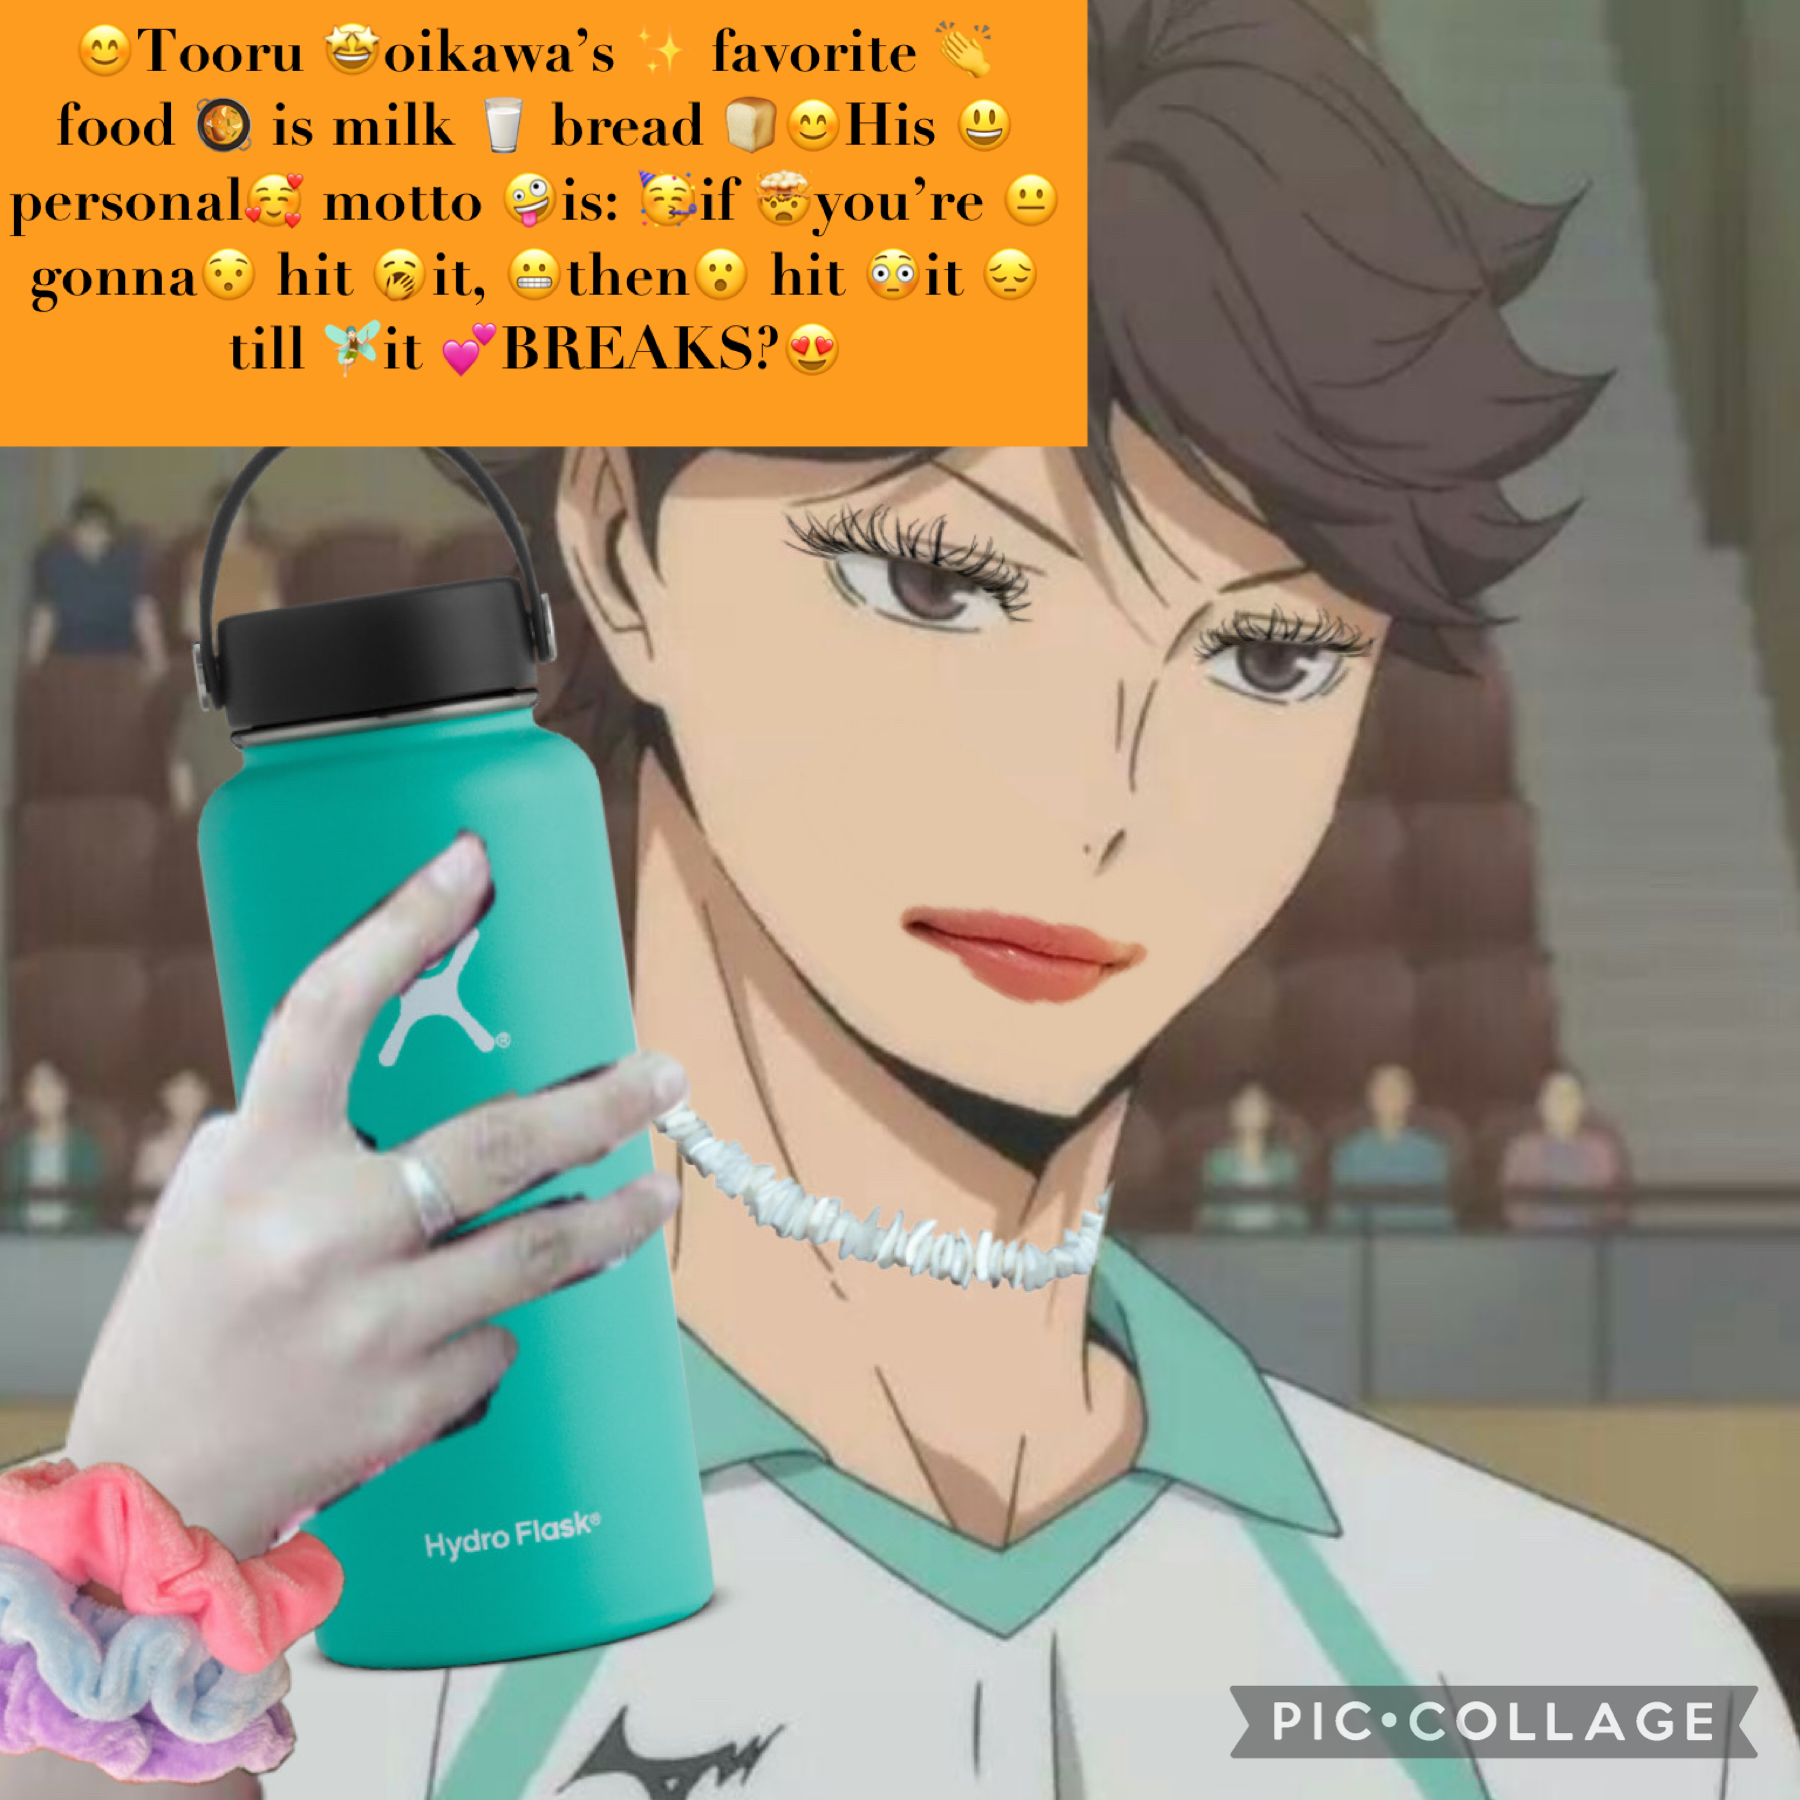 😊Tooru 🤩oikawa’s ✨ favorite 👏 food 🥘 is milk 🥛 bread 🍞😊His 😃personal🥰 motto 🤪is: 🥳if 🤯you’re 😐gonna😯 hit 🥱it, 😬then😮 hit 😳it 😔till 🧚🏻‍♂️it 💕BREAKS?😍 😊Tooru 🤩oikawa’s ✨ favorite 👏 food 🥘 is milk 🥛 bread 🍞😊His 😃personal🥰 motto 🤪is: 🥳if 🤯you’re 😐gonna😯 hit 🥱